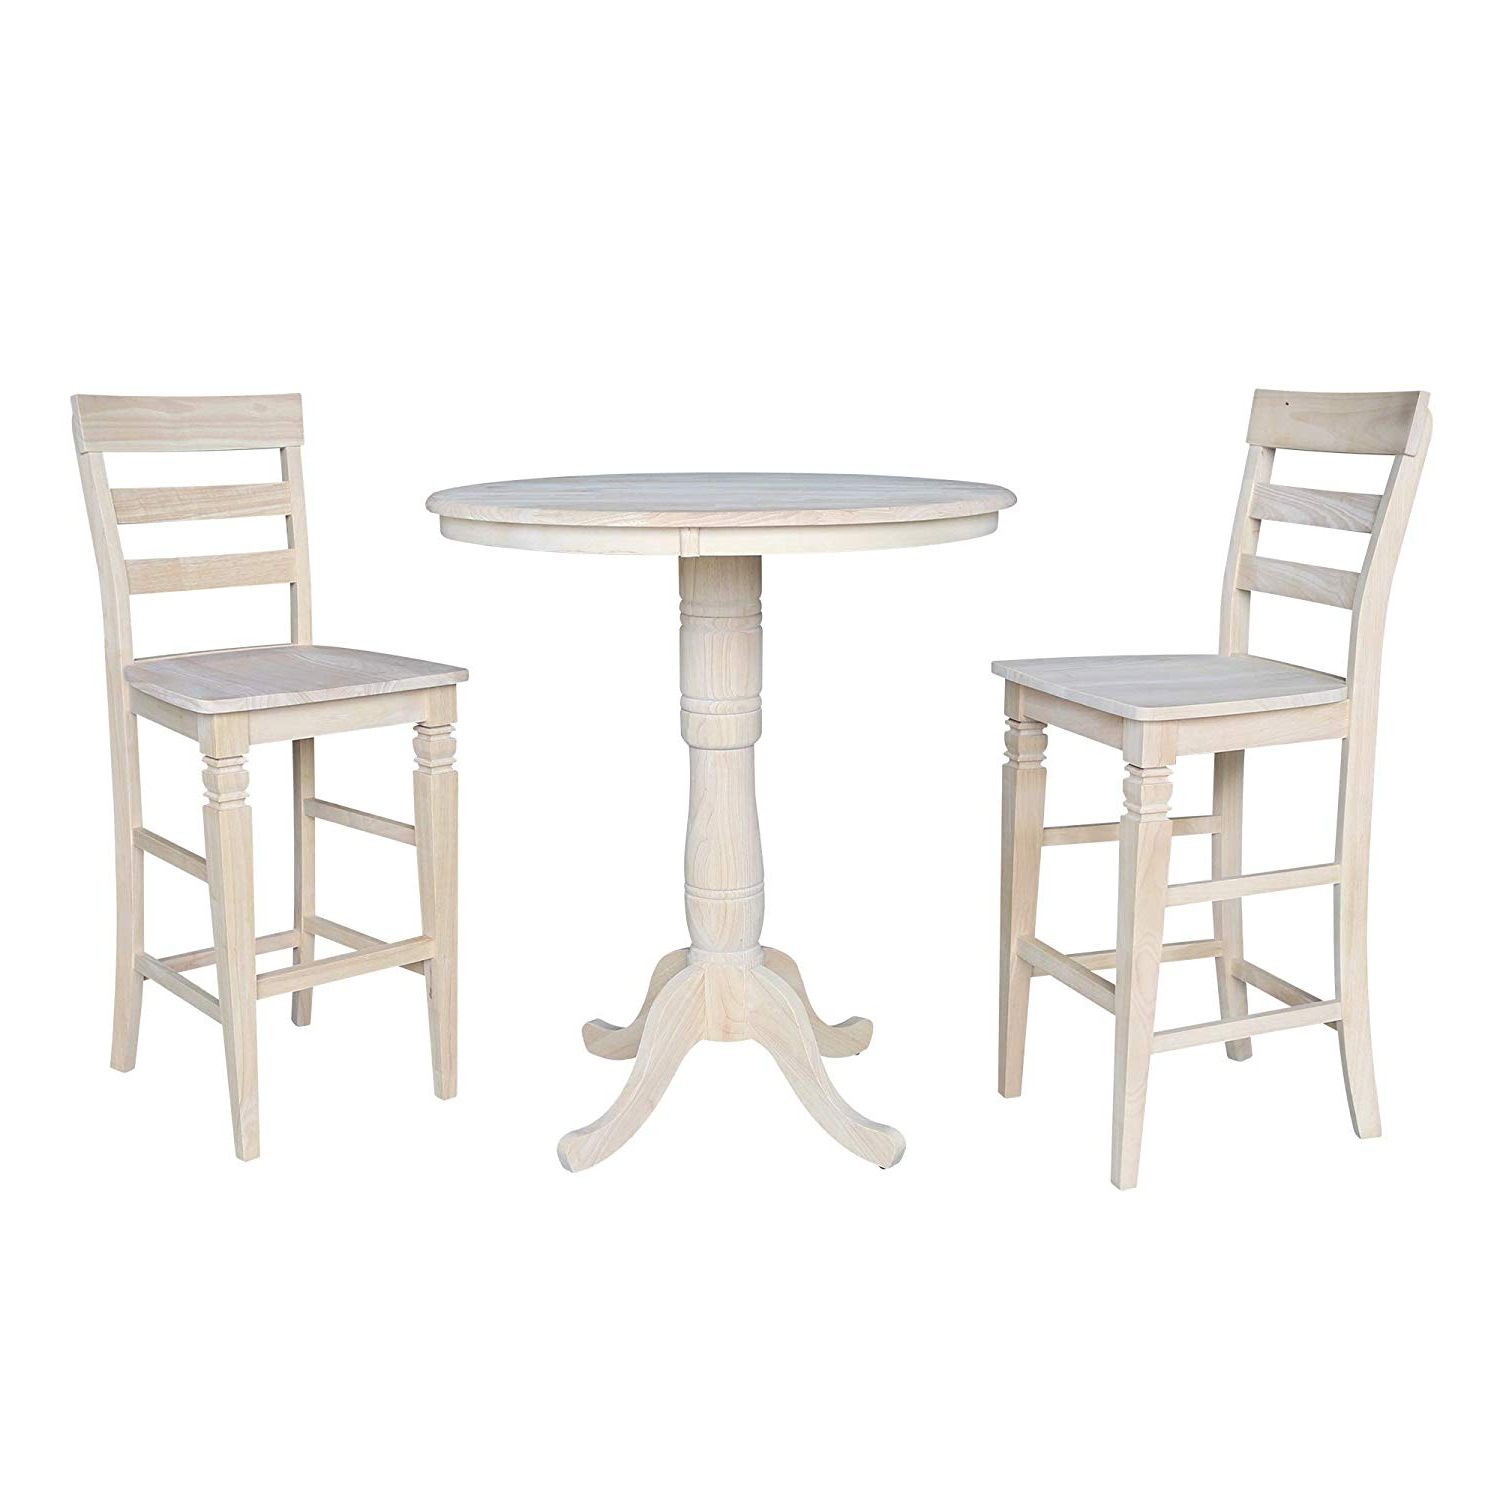 Most Recent Carson Counter Height Tables Regarding Amazon – International Concepts 3 Pc Parawood Dining (View 17 of 25)